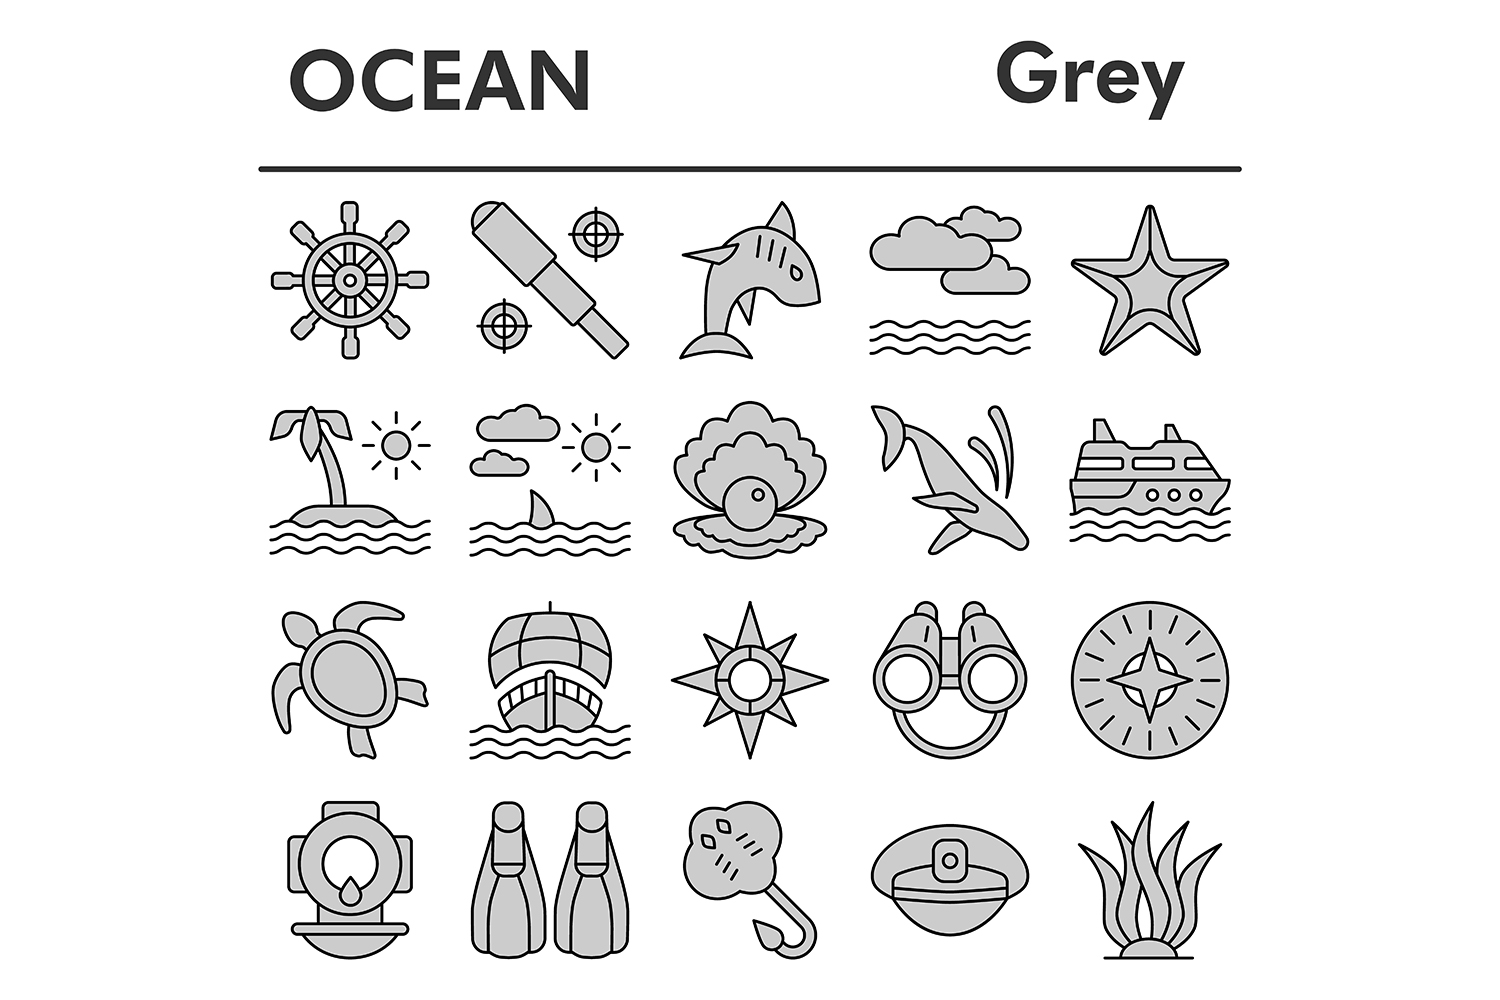 Ocean icons set, gray style pinterest preview image.